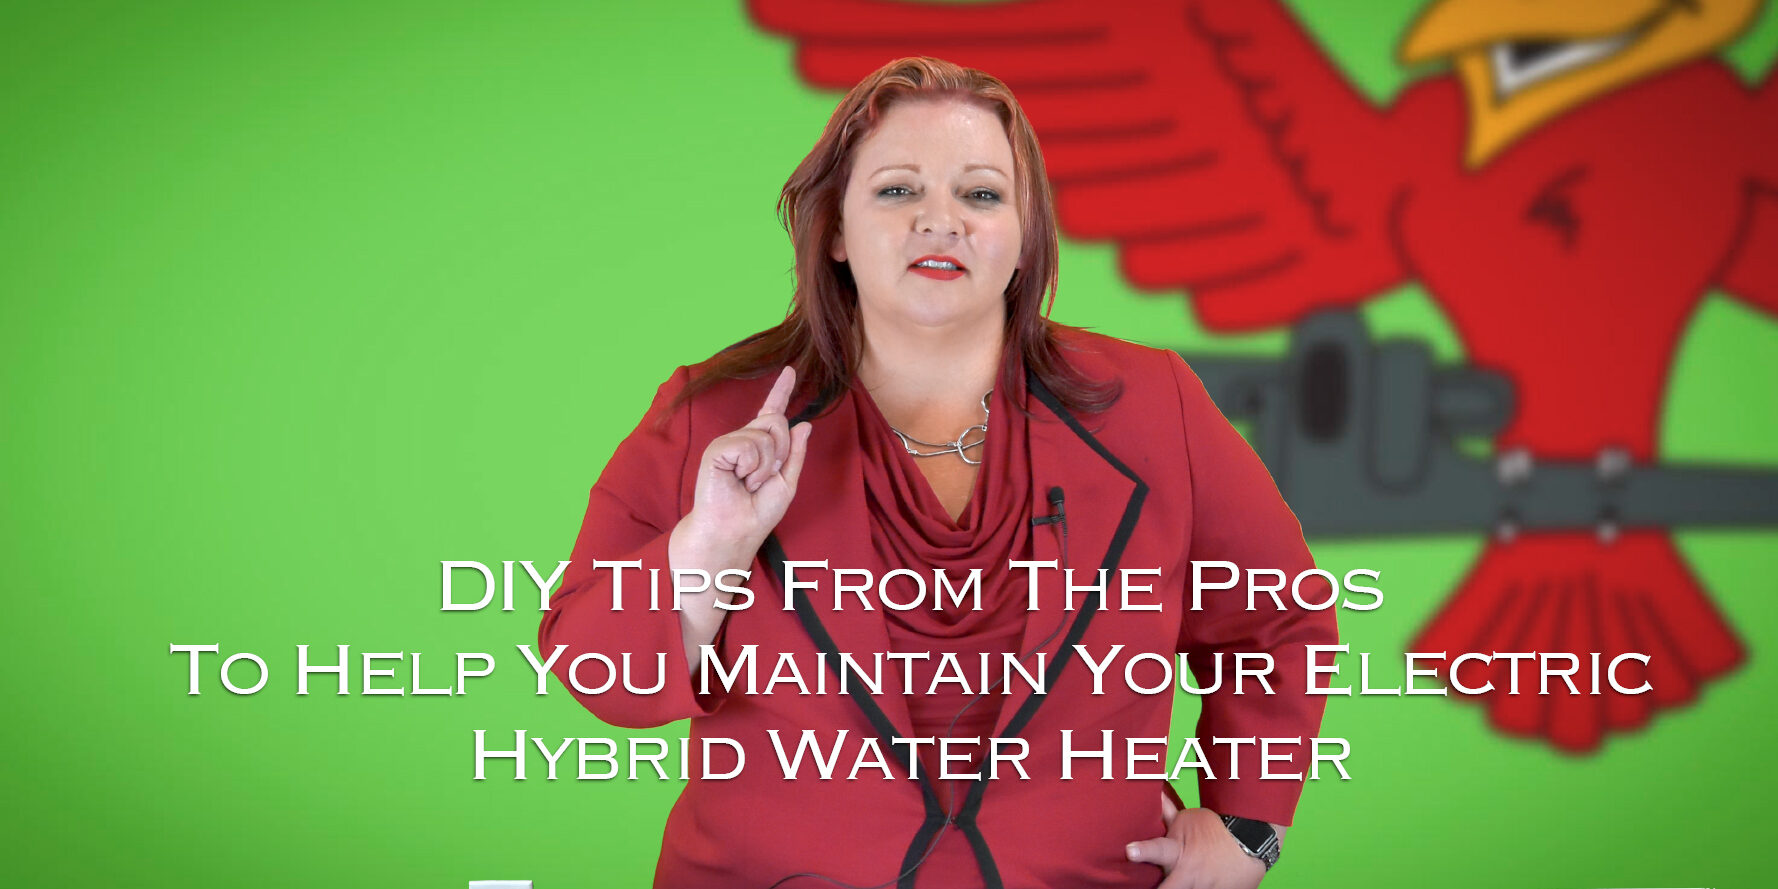 Stephanie Robins, the owner of Robins Plumbing with featured blog titled 'diy-tips-from-the pros to help you maintain your electric hybrid water heater'